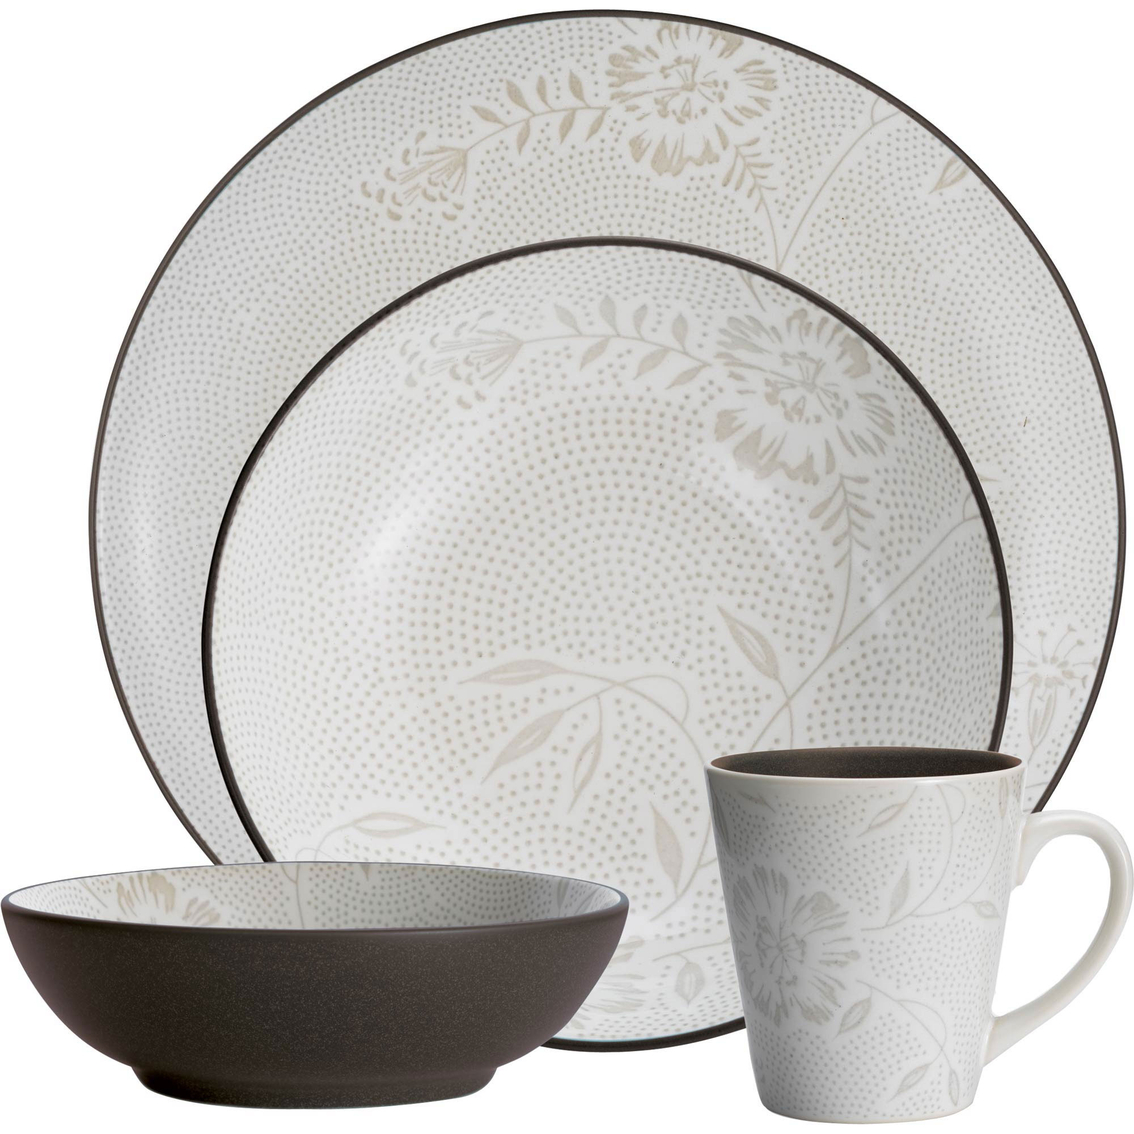  Noritake Colorwave  Bloom Collection Coupe 4 Pc Place 